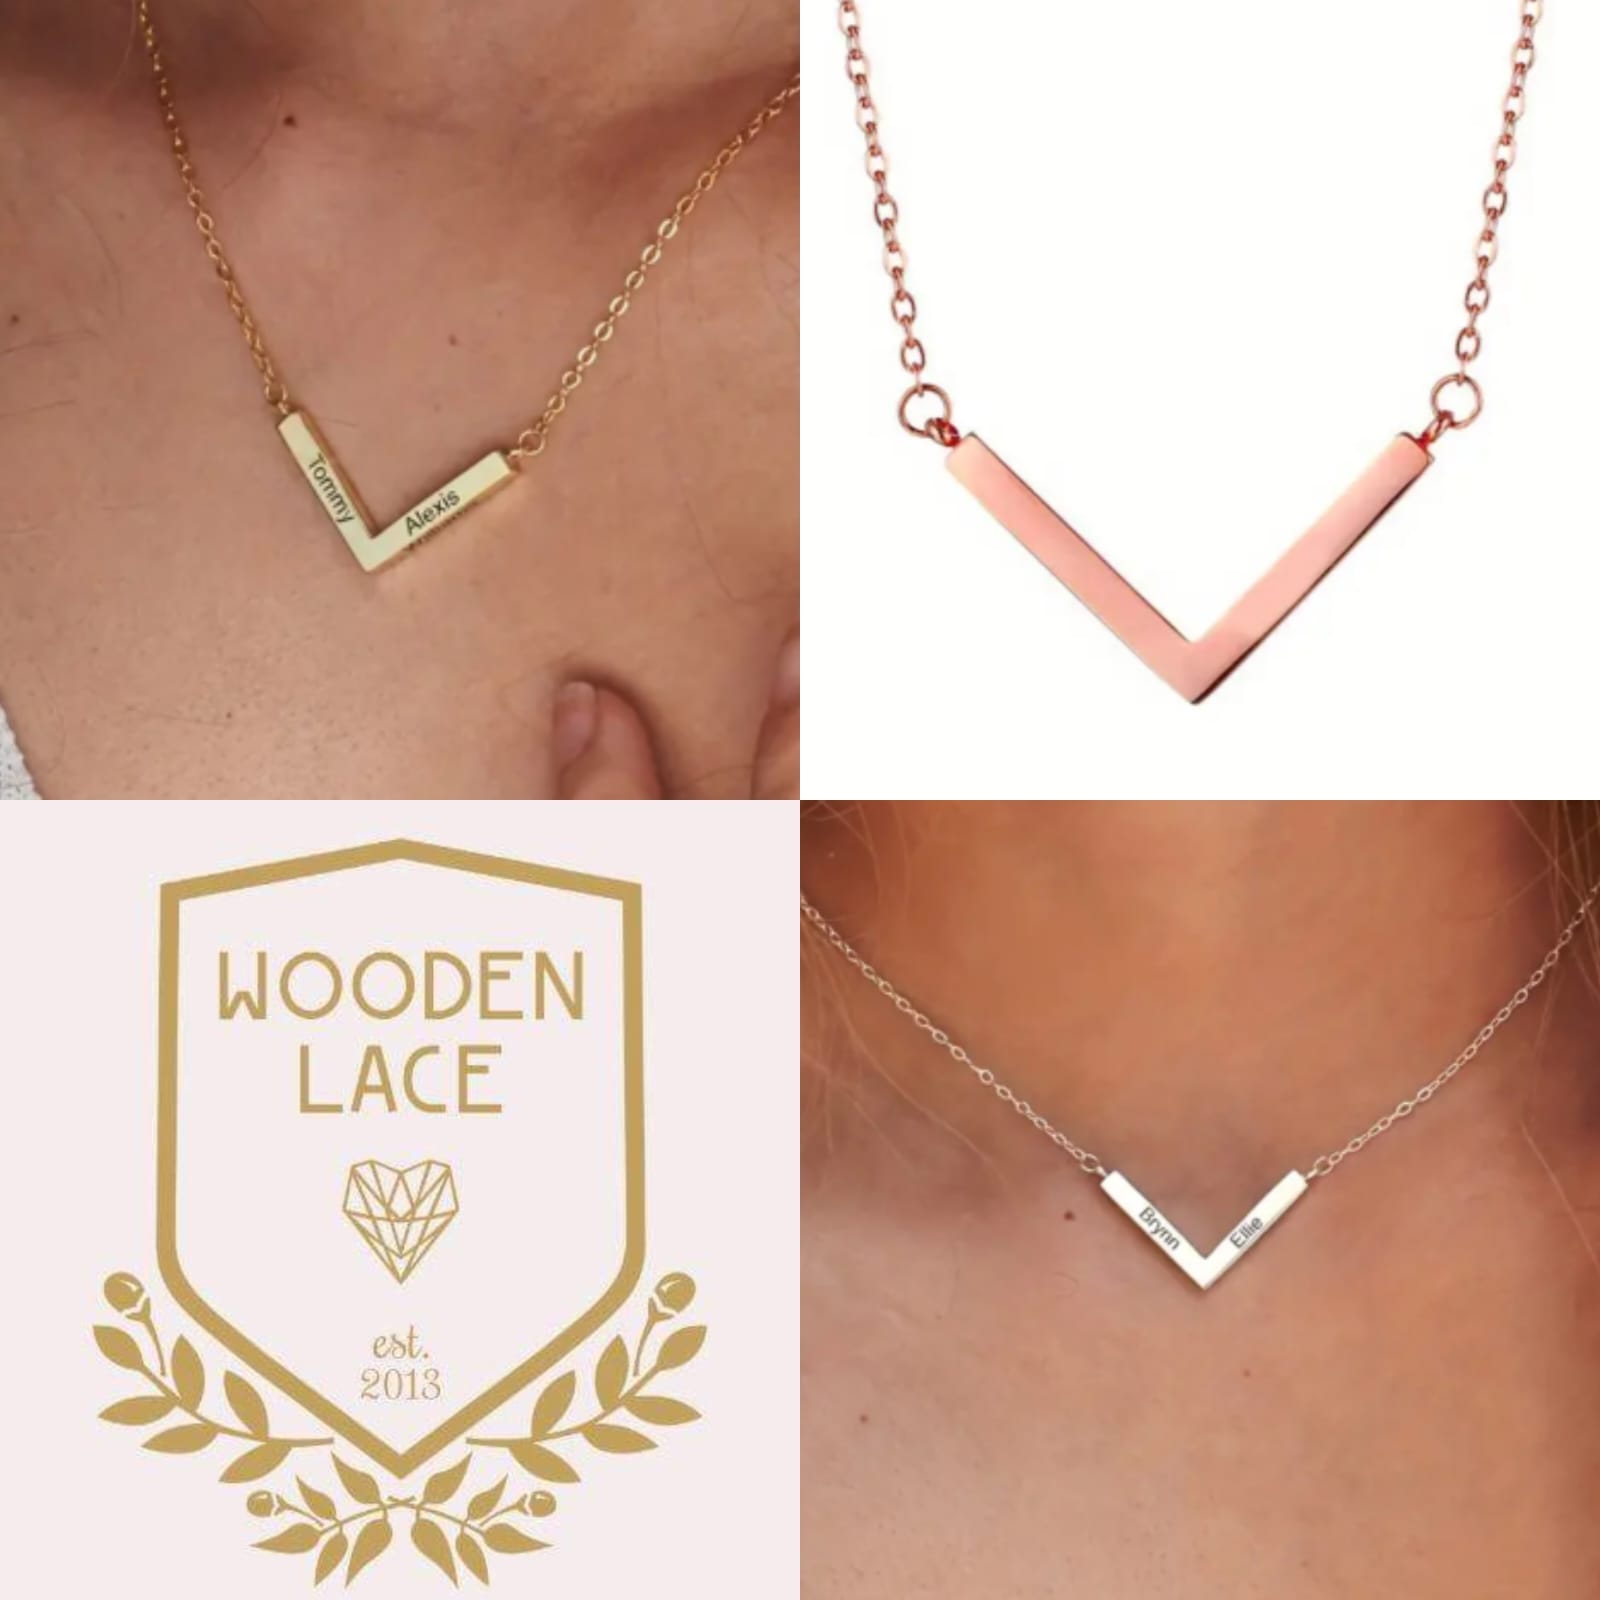 V-necklace personilized with engraving available in gold silver and rosegold. R650